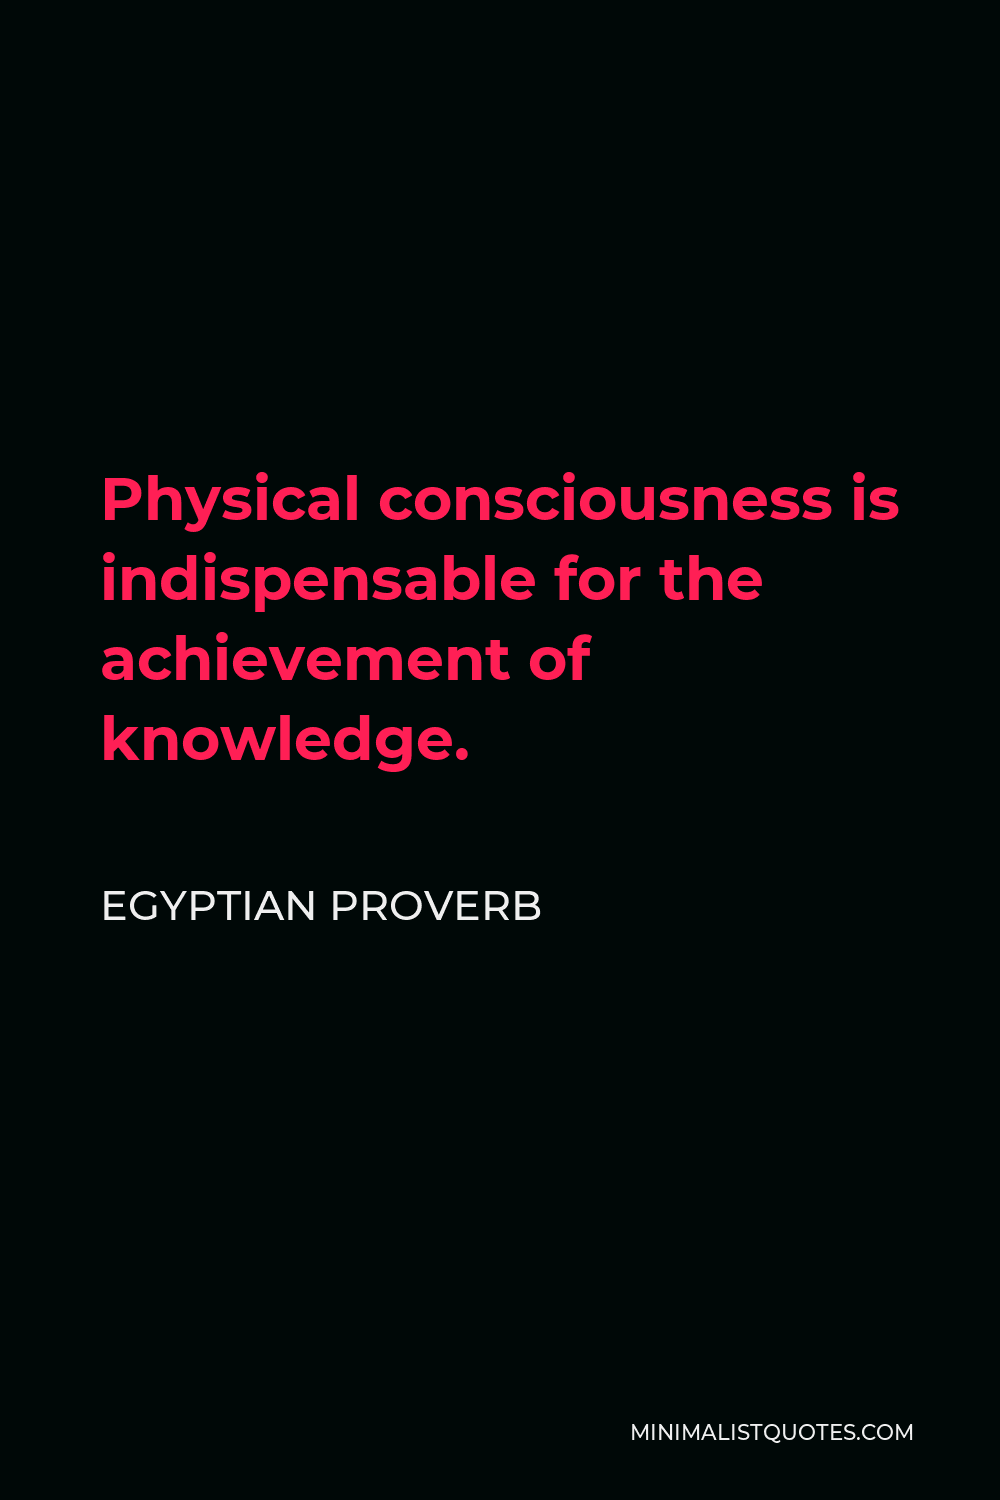 Egyptian Proverb Quote - Physical consciousness is indispensable for the achievement of knowledge.